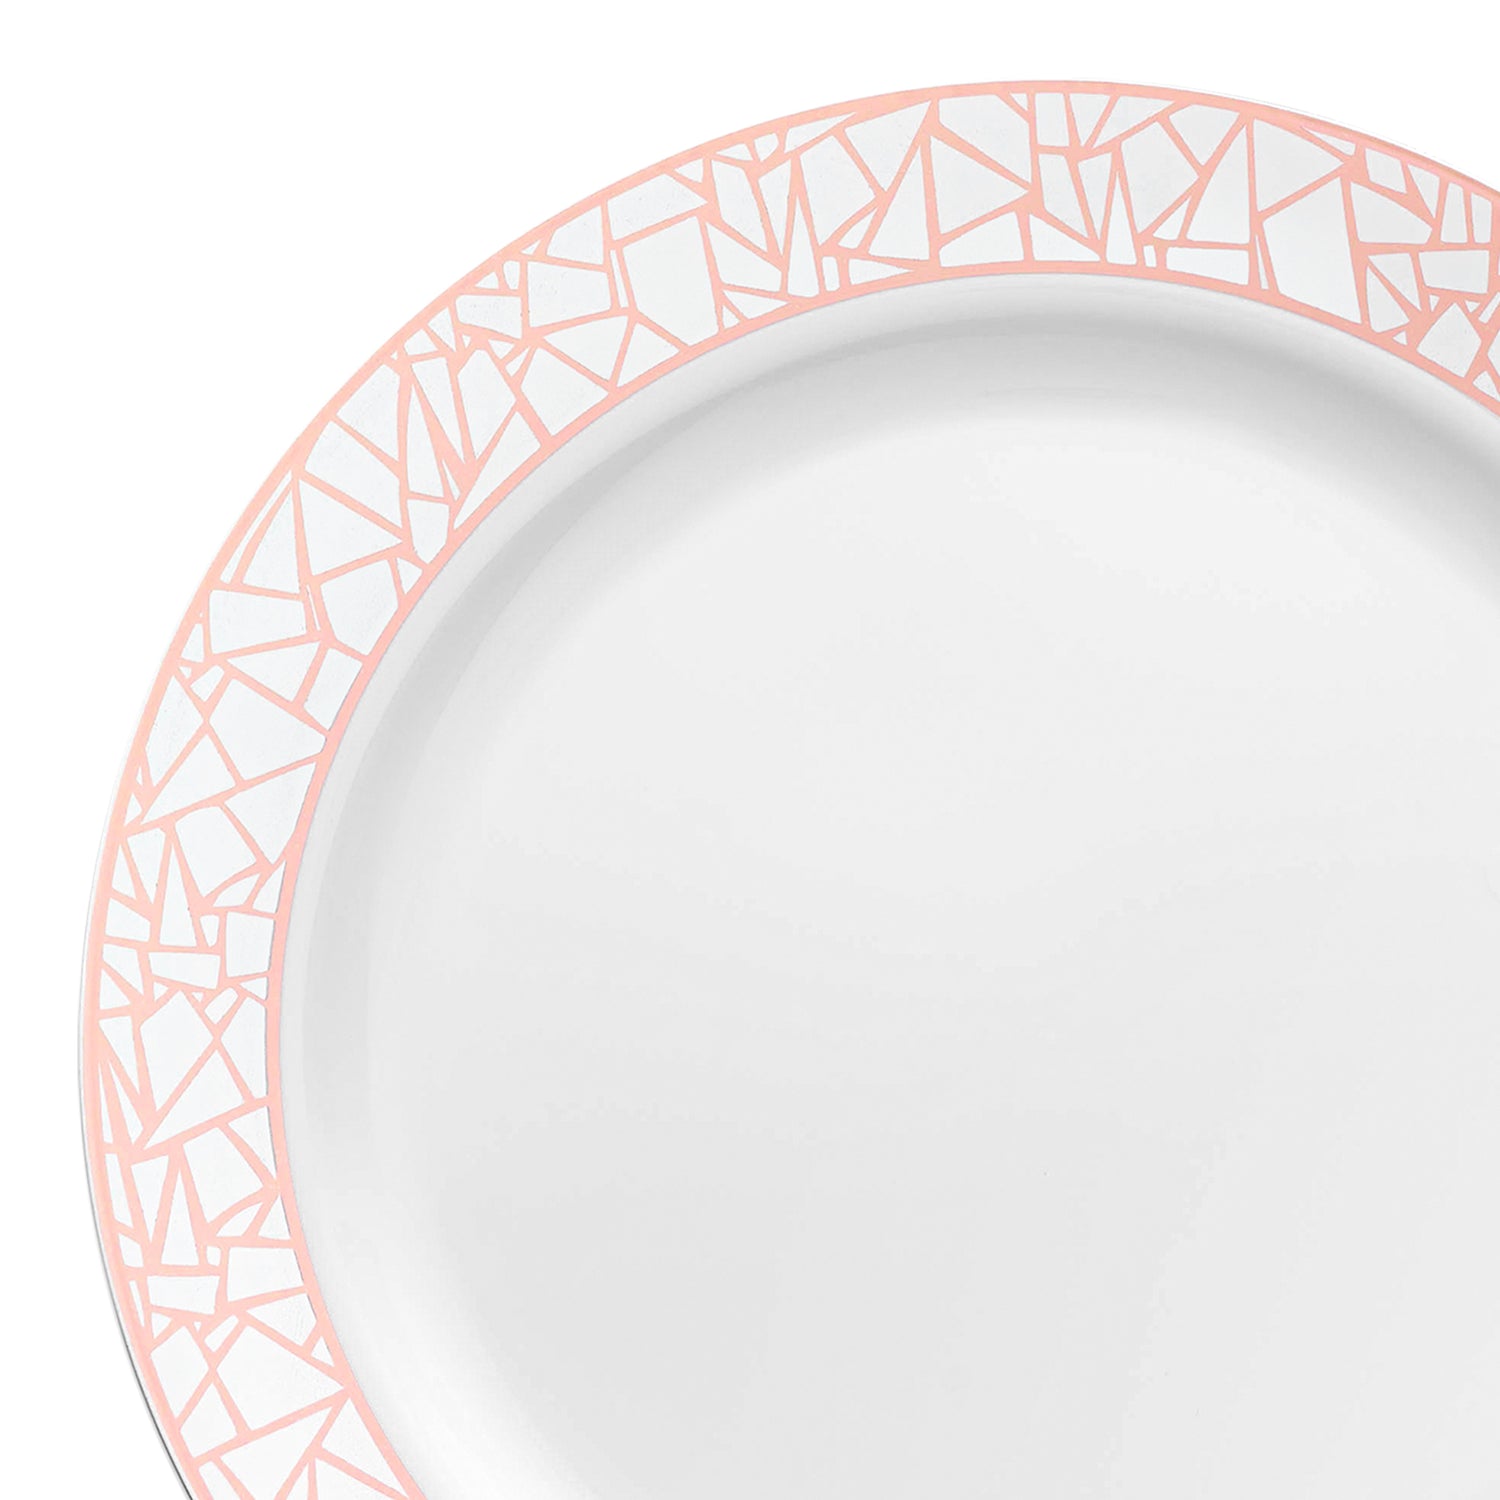 White with Silver and Rose Gold Mosaic Rim Round Disposable Plastic Dinner Plates (10.25") | The Kaya Collection